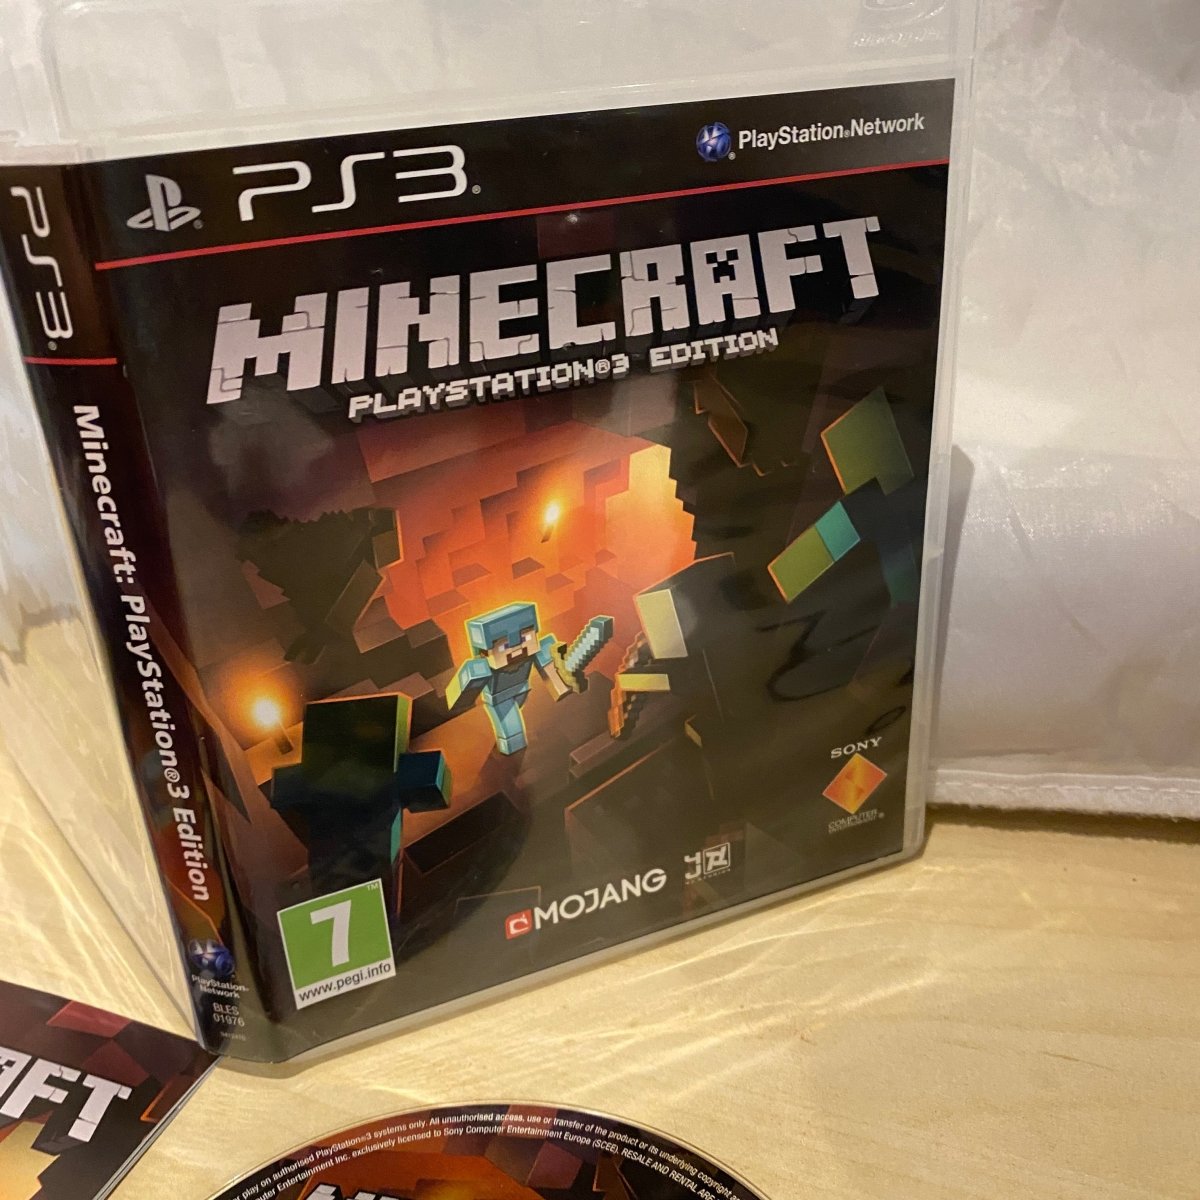 Minecraft: PlayStation 3 Edition (PS3) Game Details